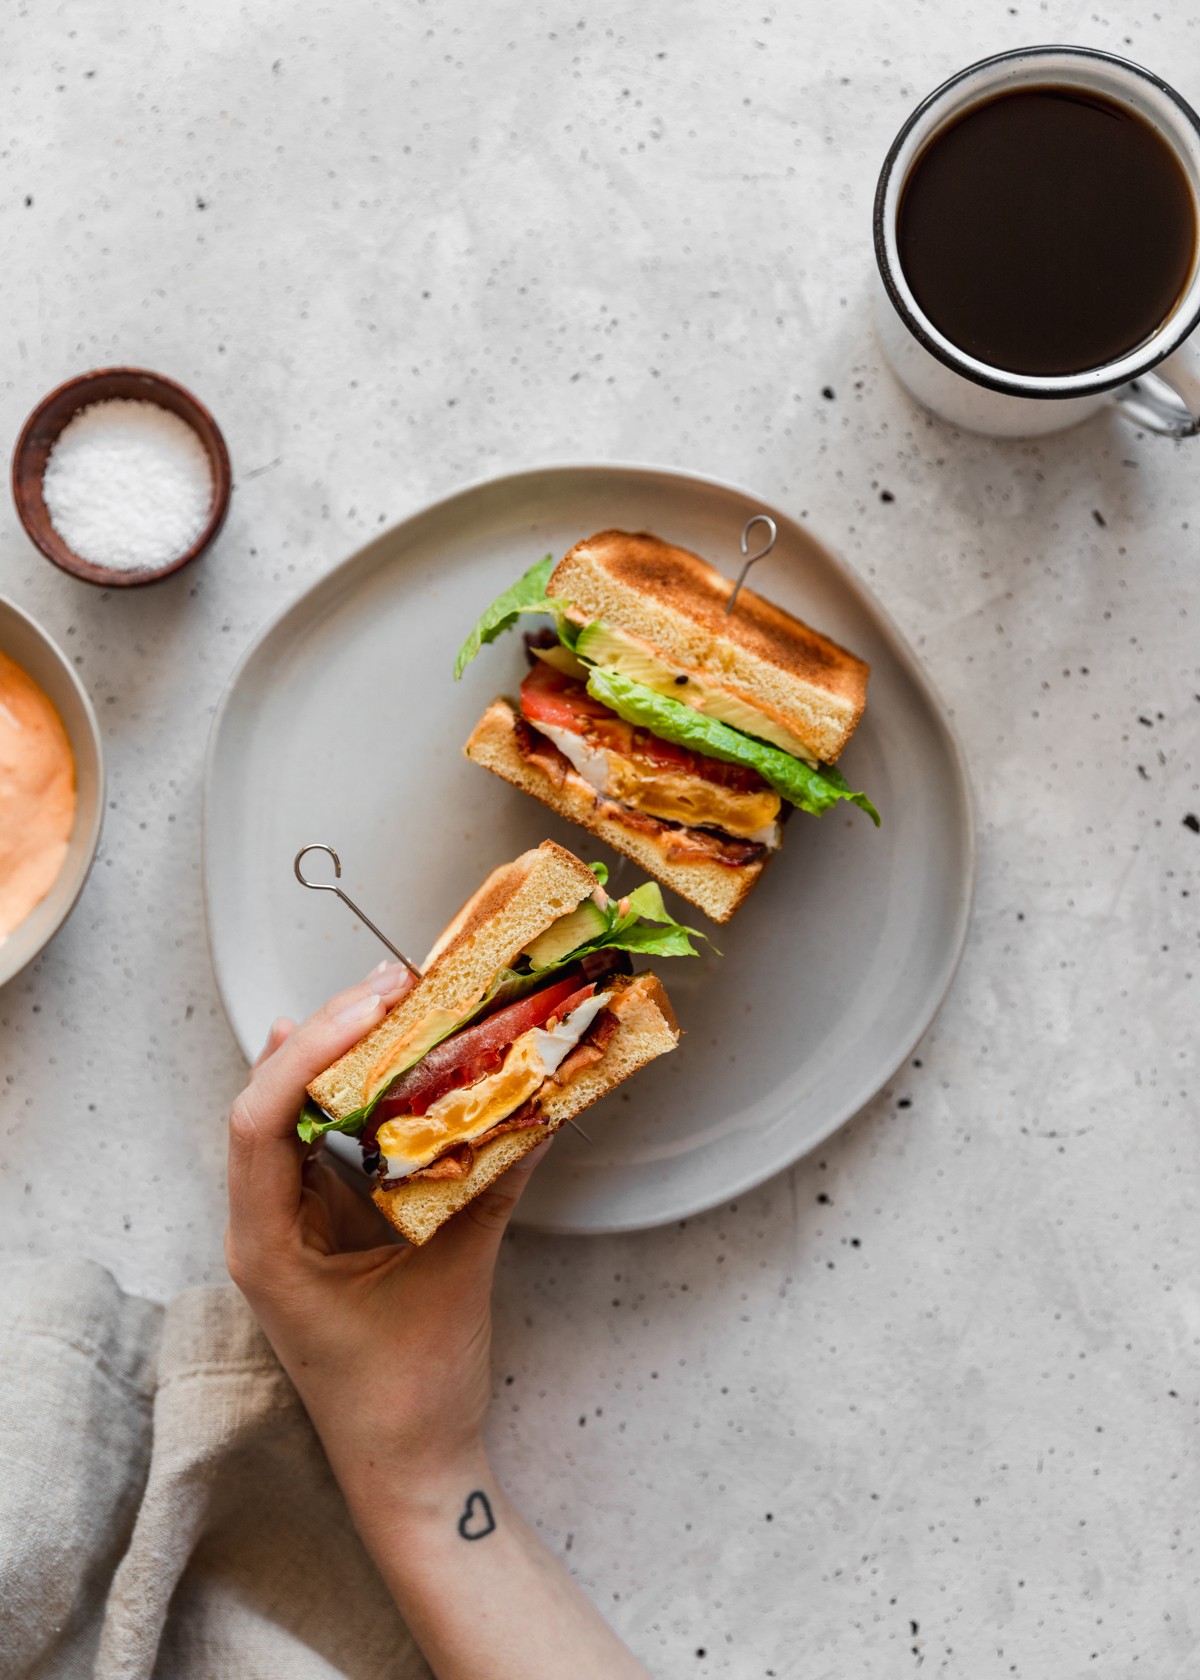 An overhead image of a woman's hands holding a breakfast BLT over a white plate on a grey table next to a cup of coffee and wooden bowl of salt.